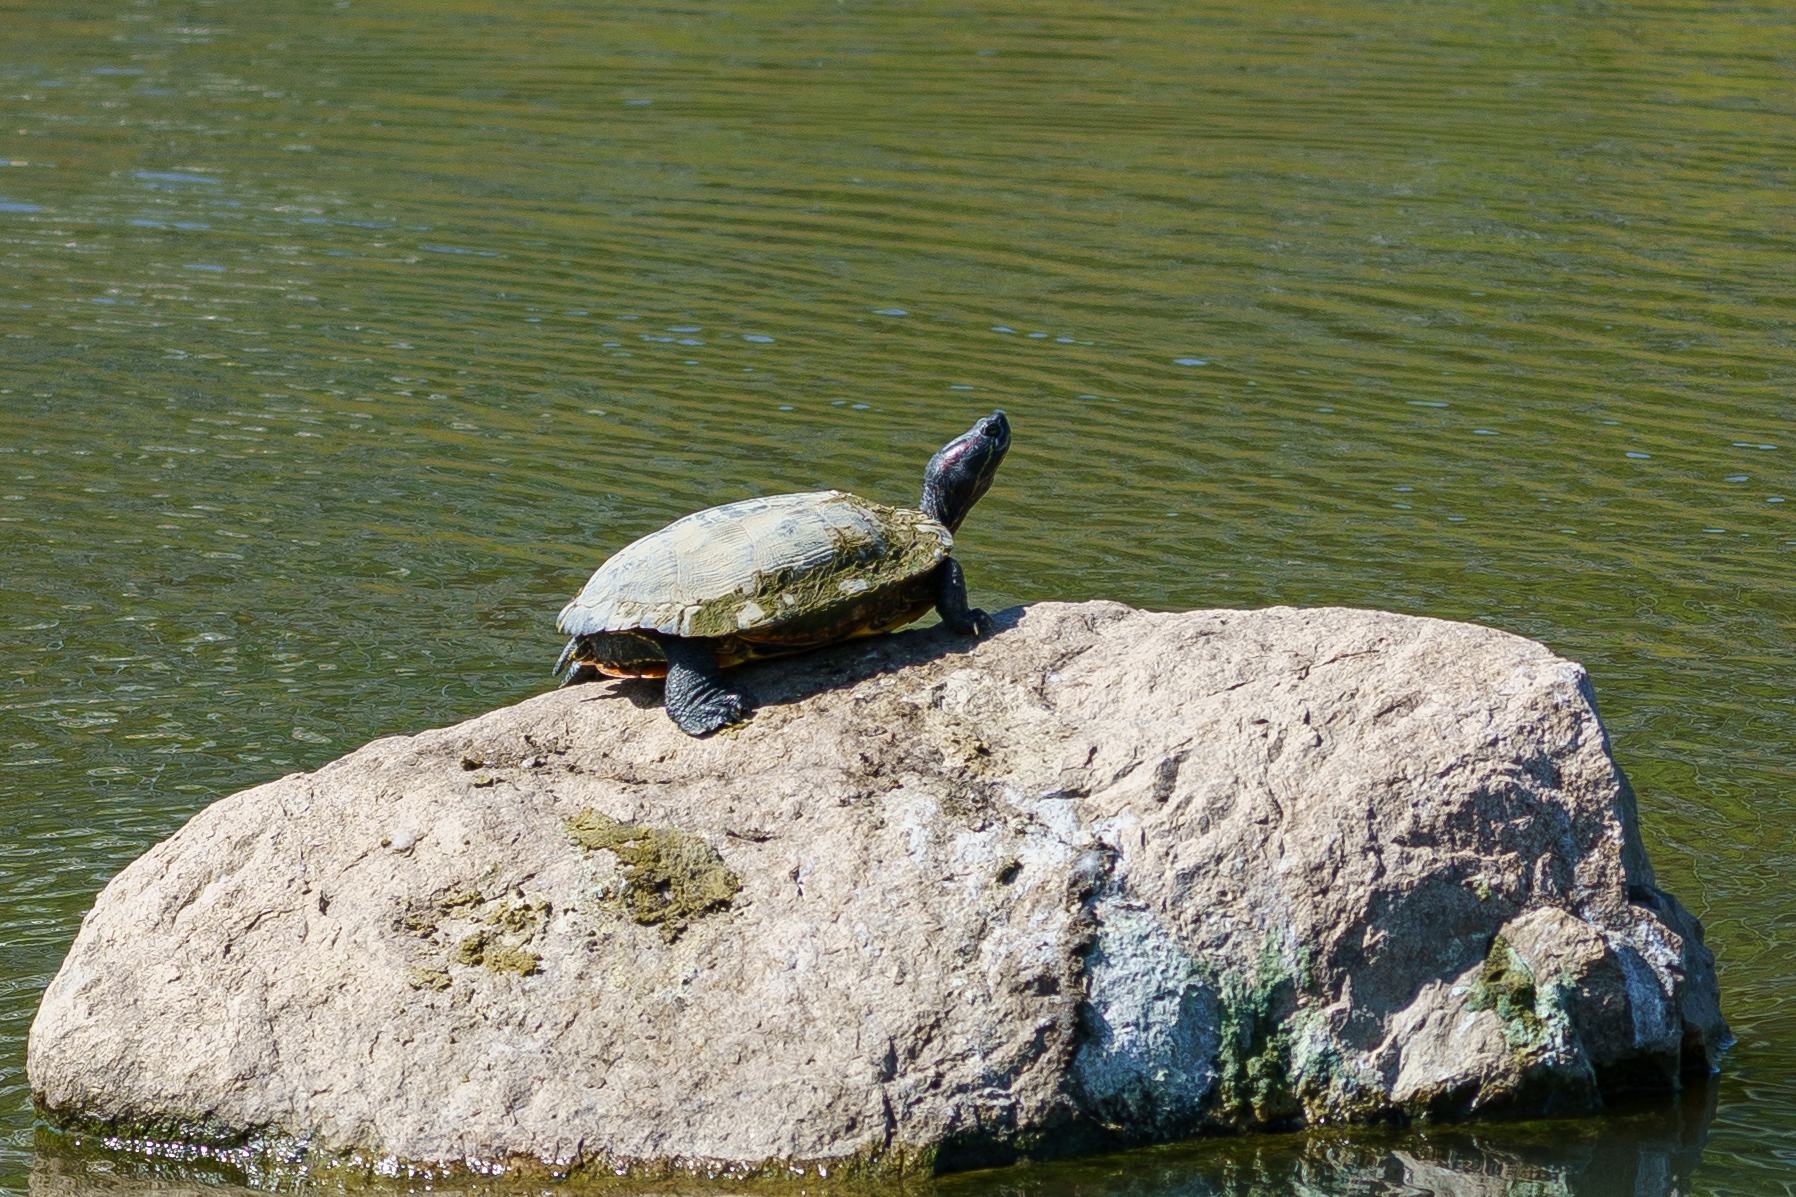 Photo of a turtle